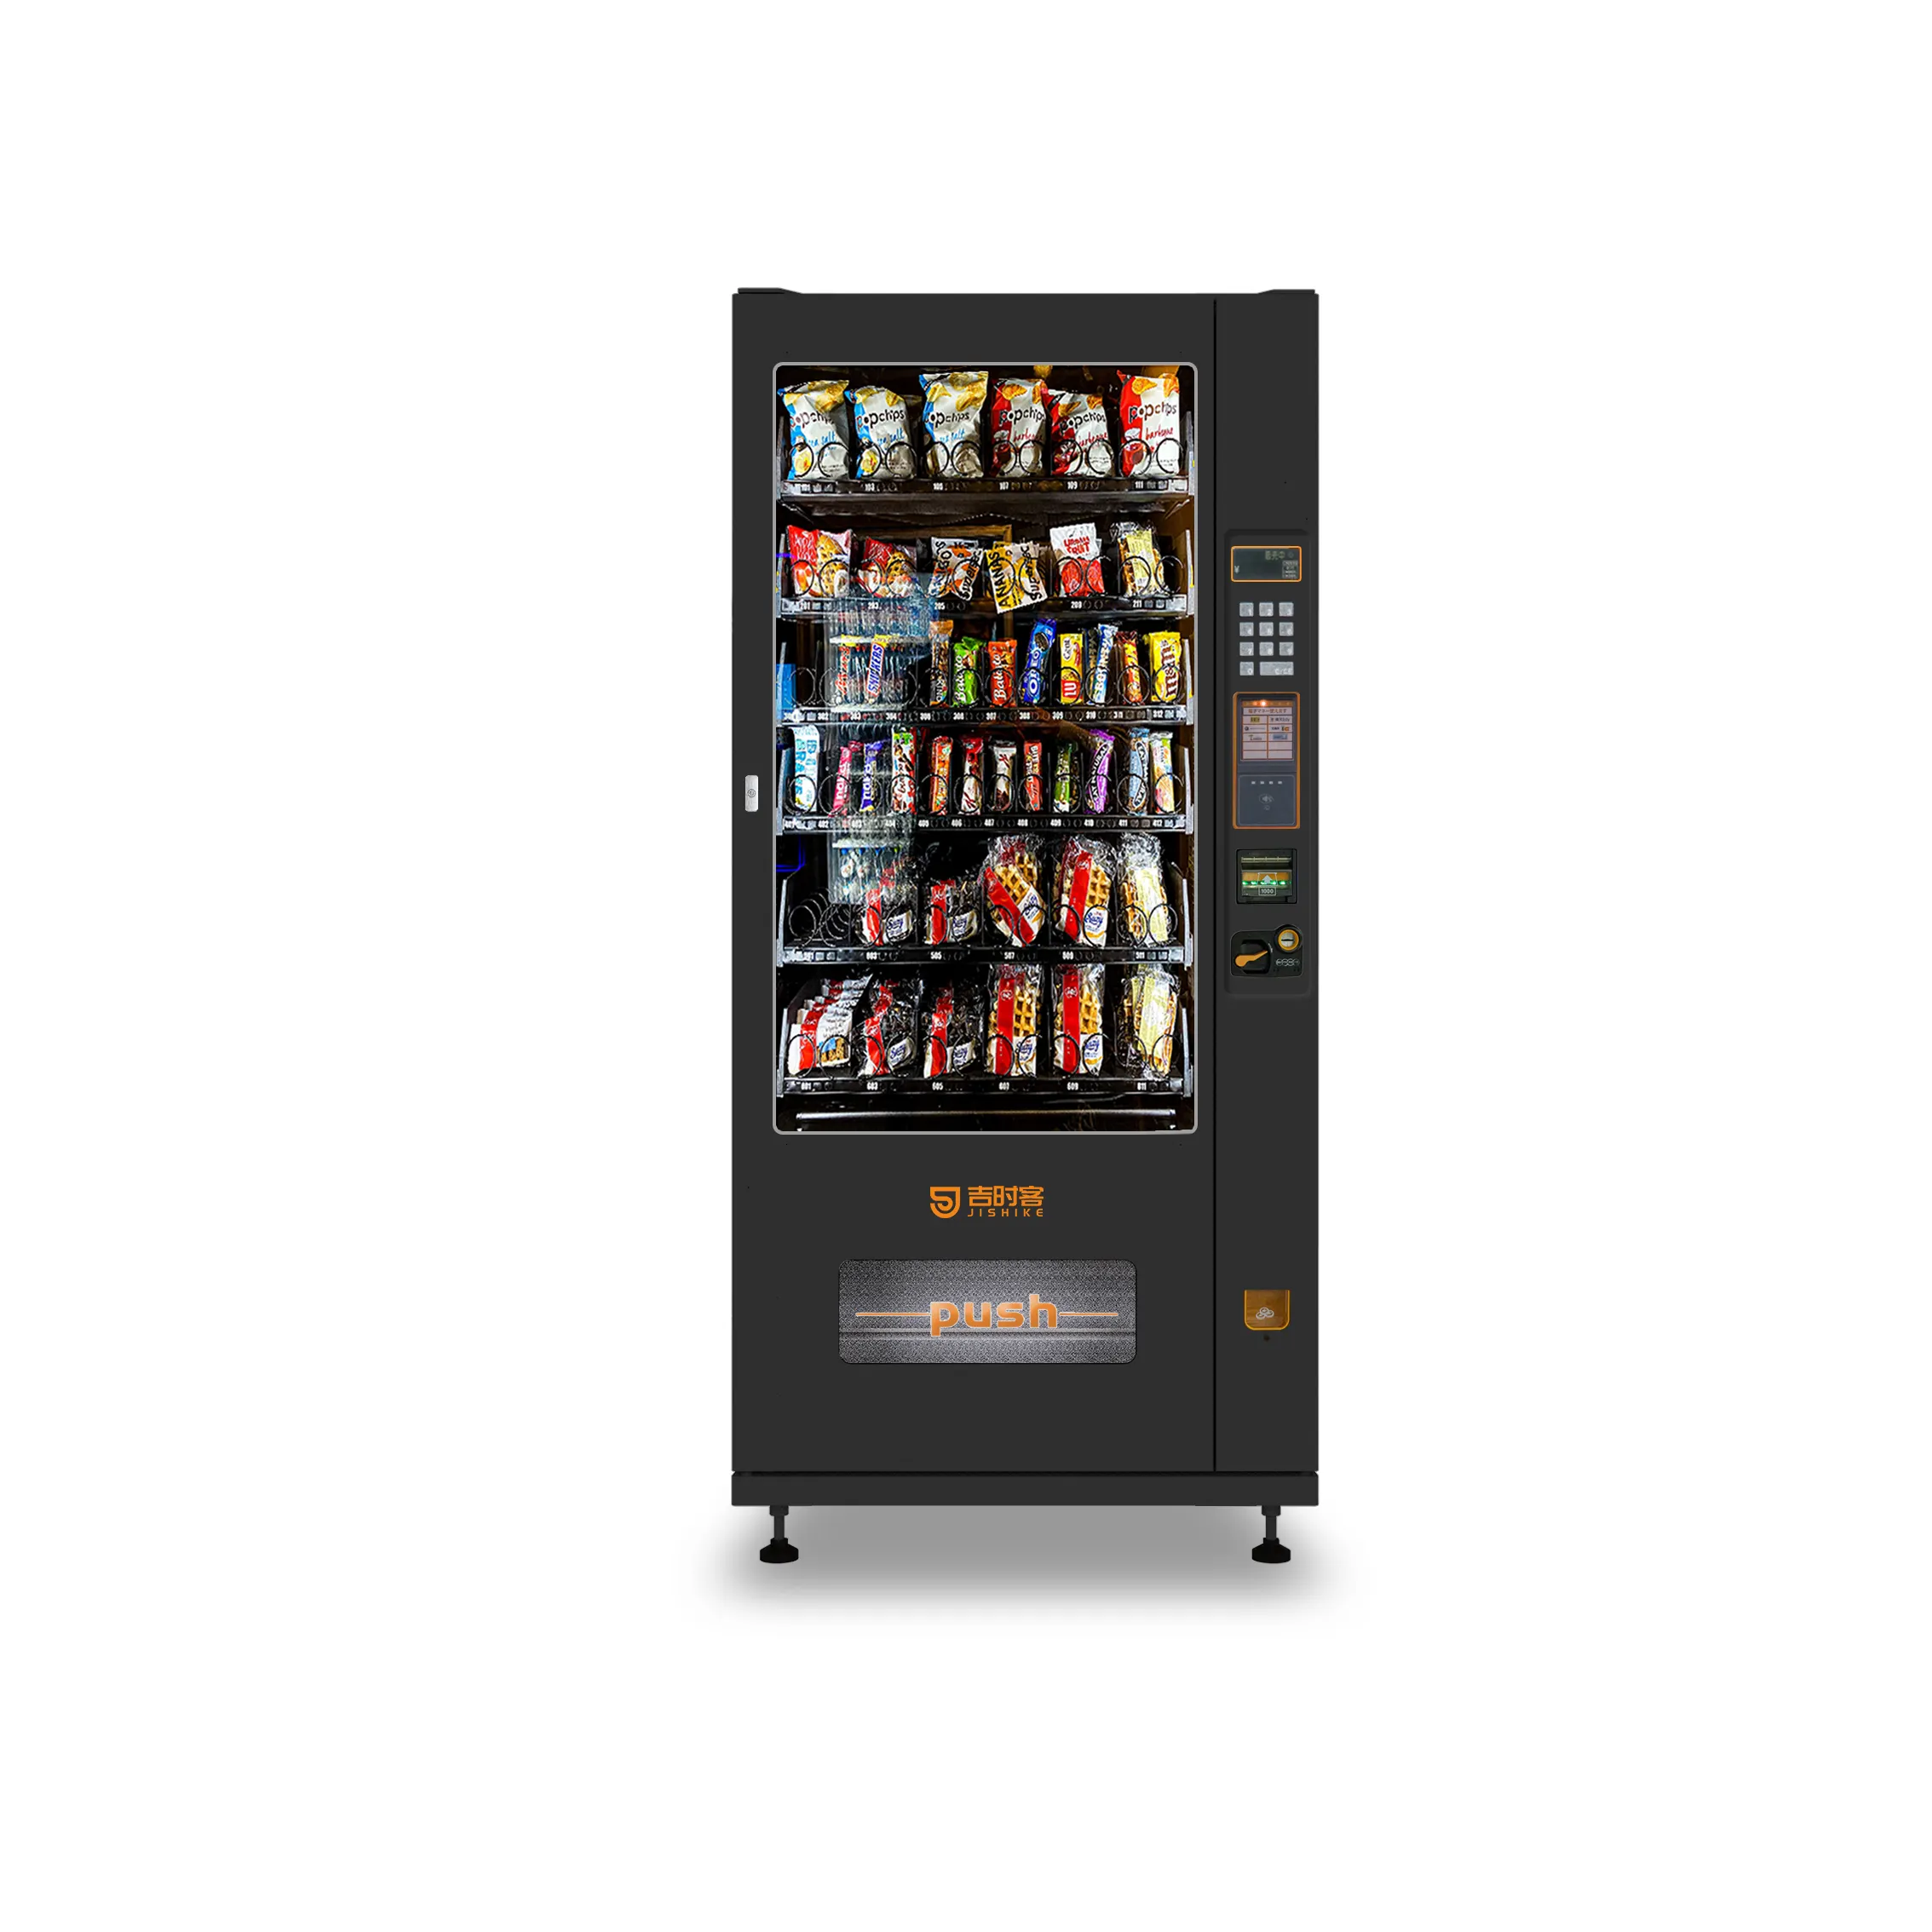 Hot Selling Snack Machine Automatic Sale Vending Machine for Snack Vending Machine with Card Reader